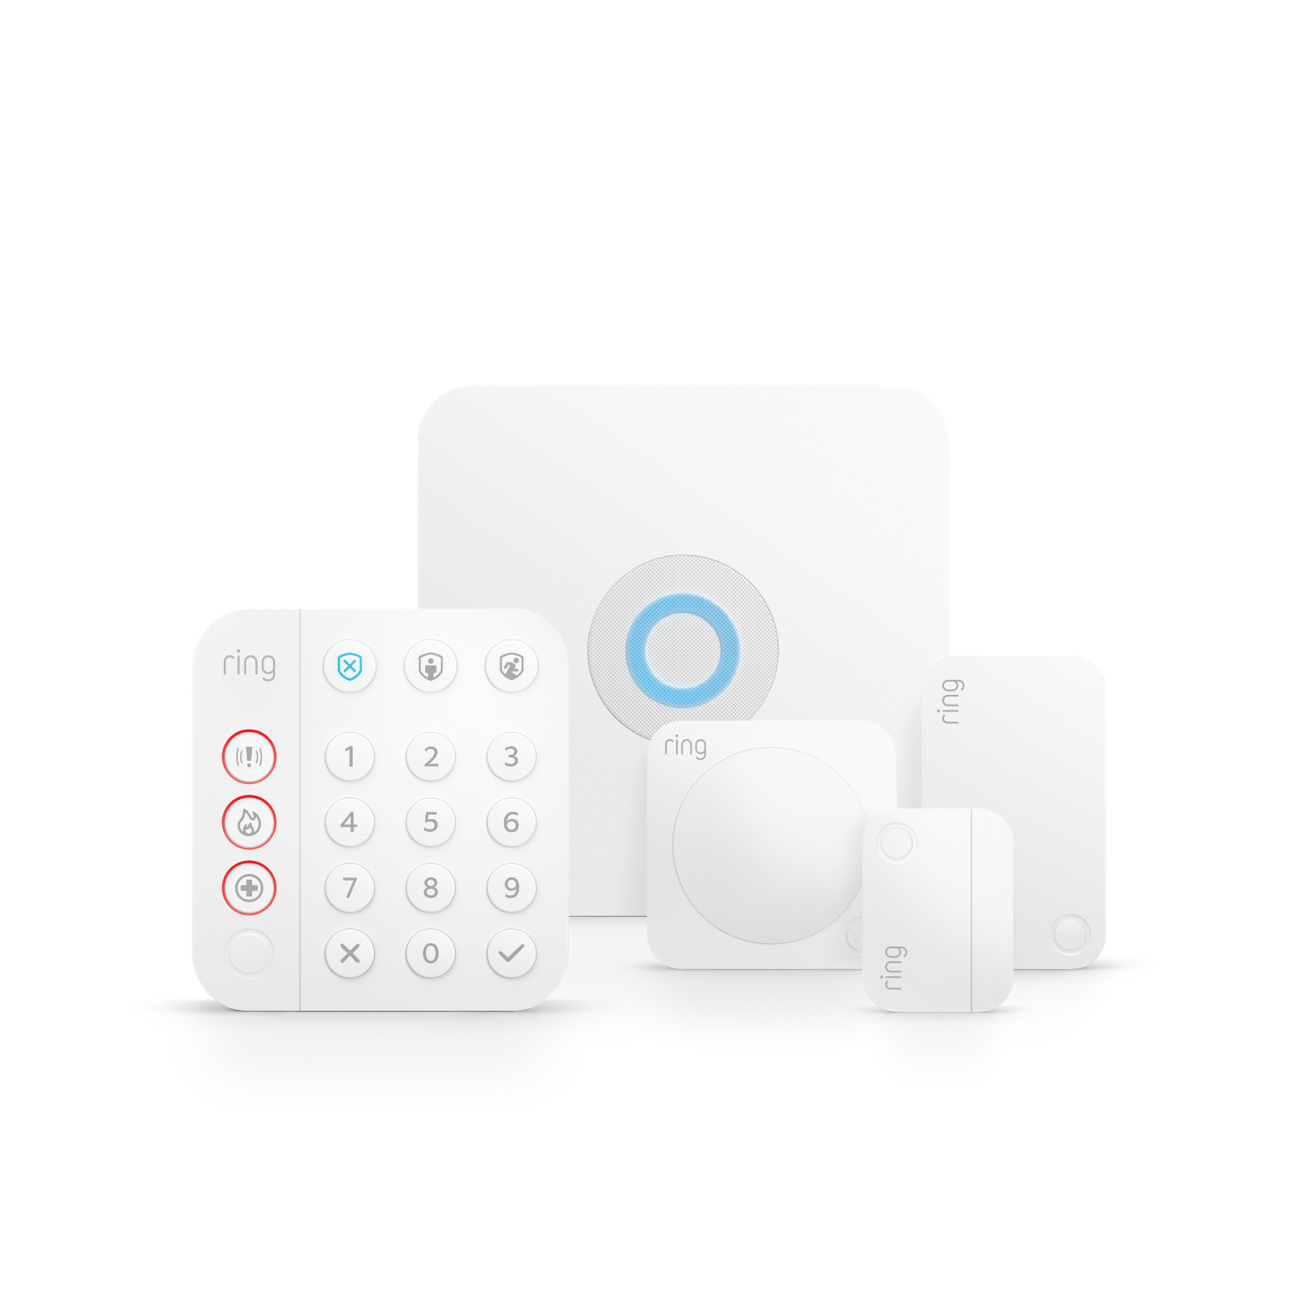 Ring Alarm Security Kit, 5 piece - 2nd Generation